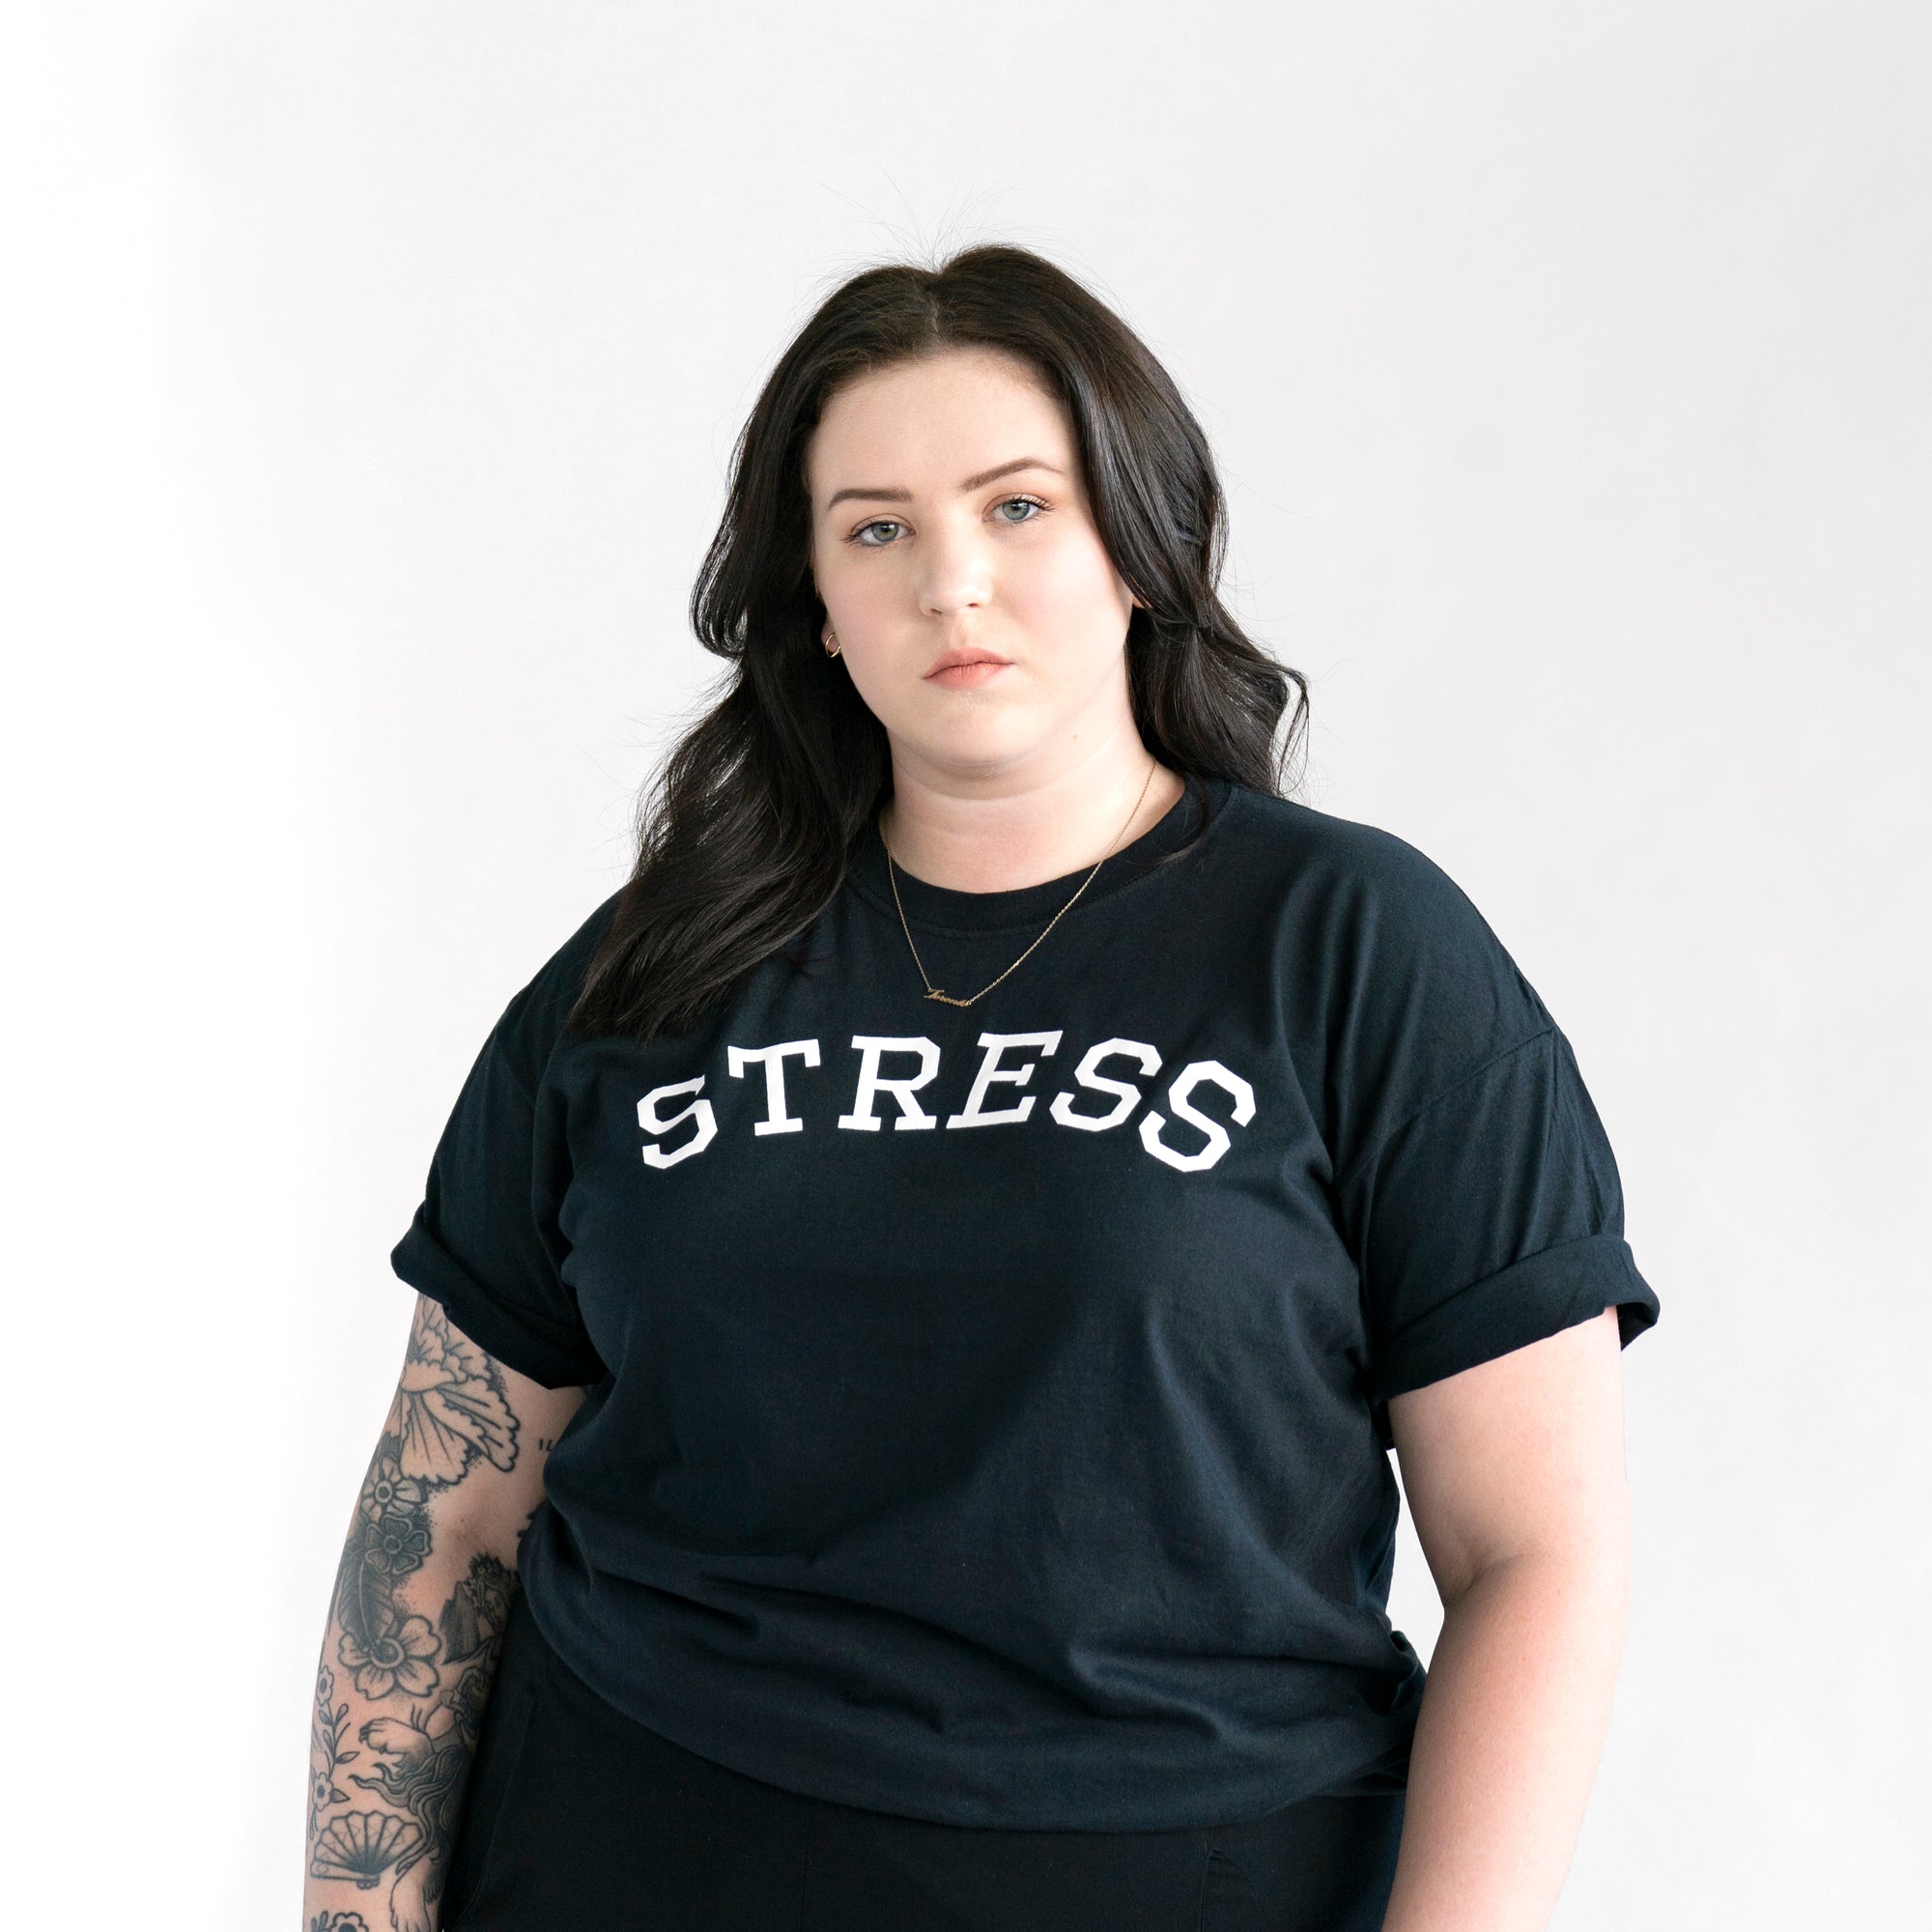 Photo of a female model wearing the original NO FUN® "STRESS" t-shirt. Shirt is black and features large white collegiate style text that reads "STRESS" across the front in an arc shape.